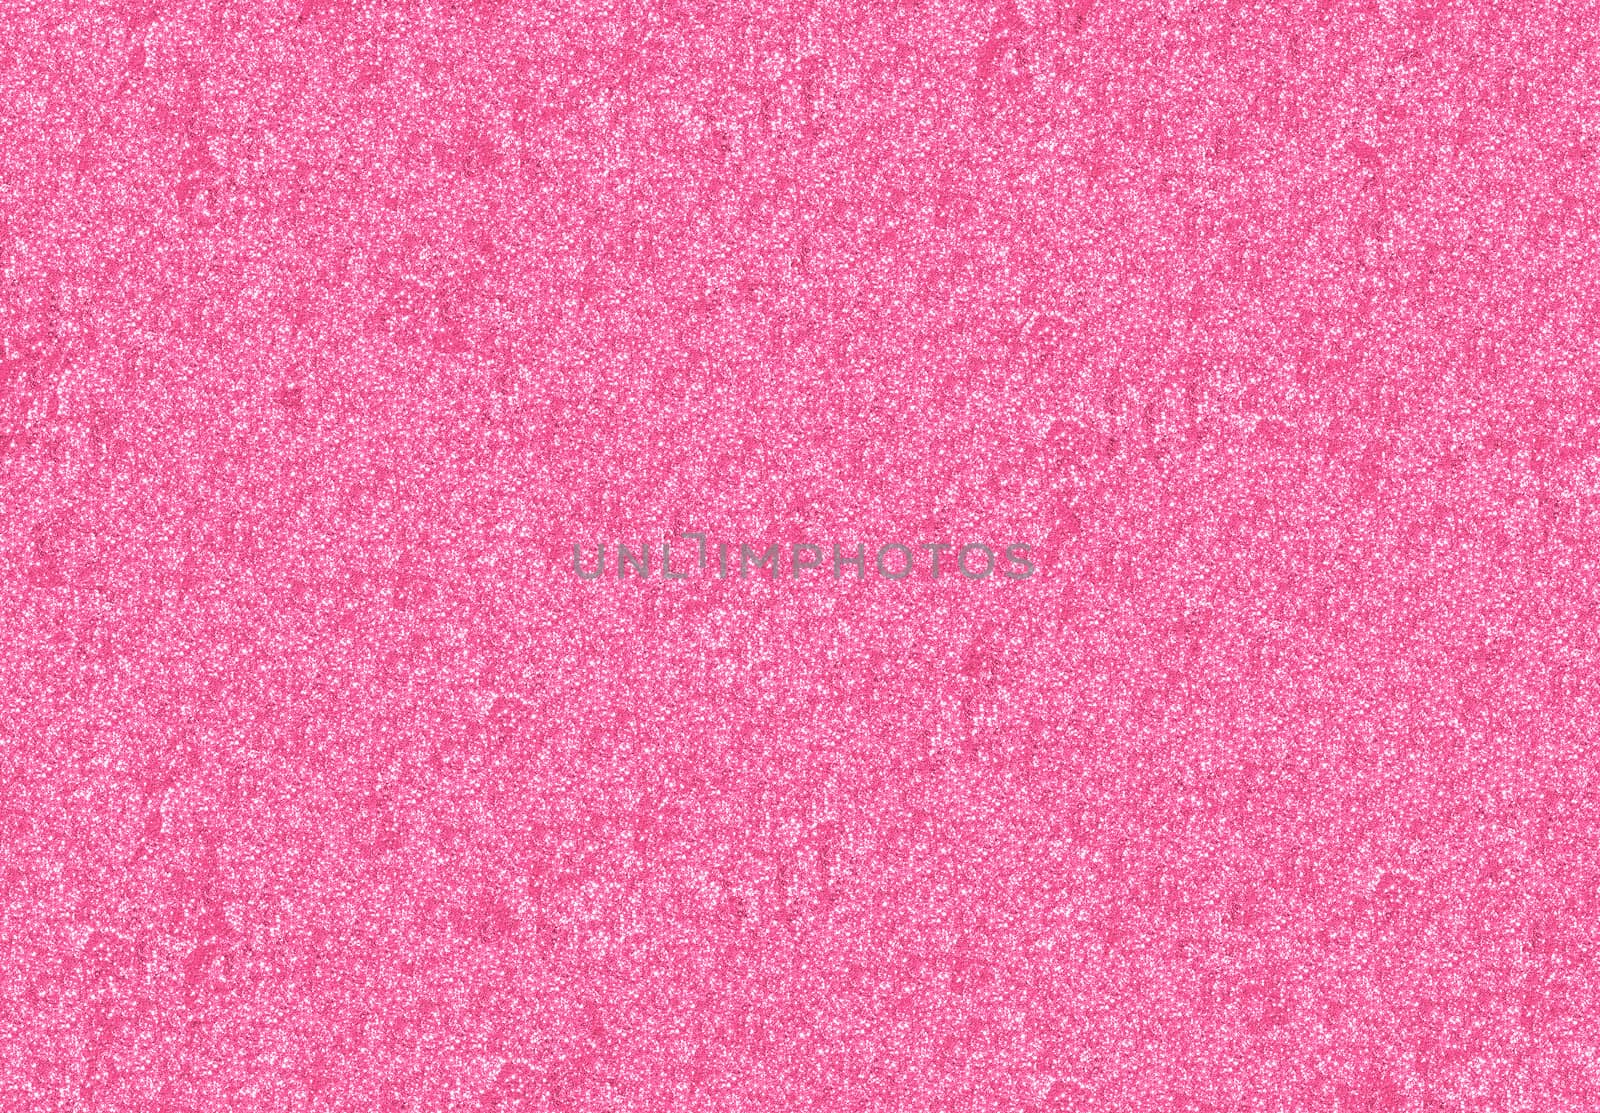 pink glitter background by ftlaudgirl